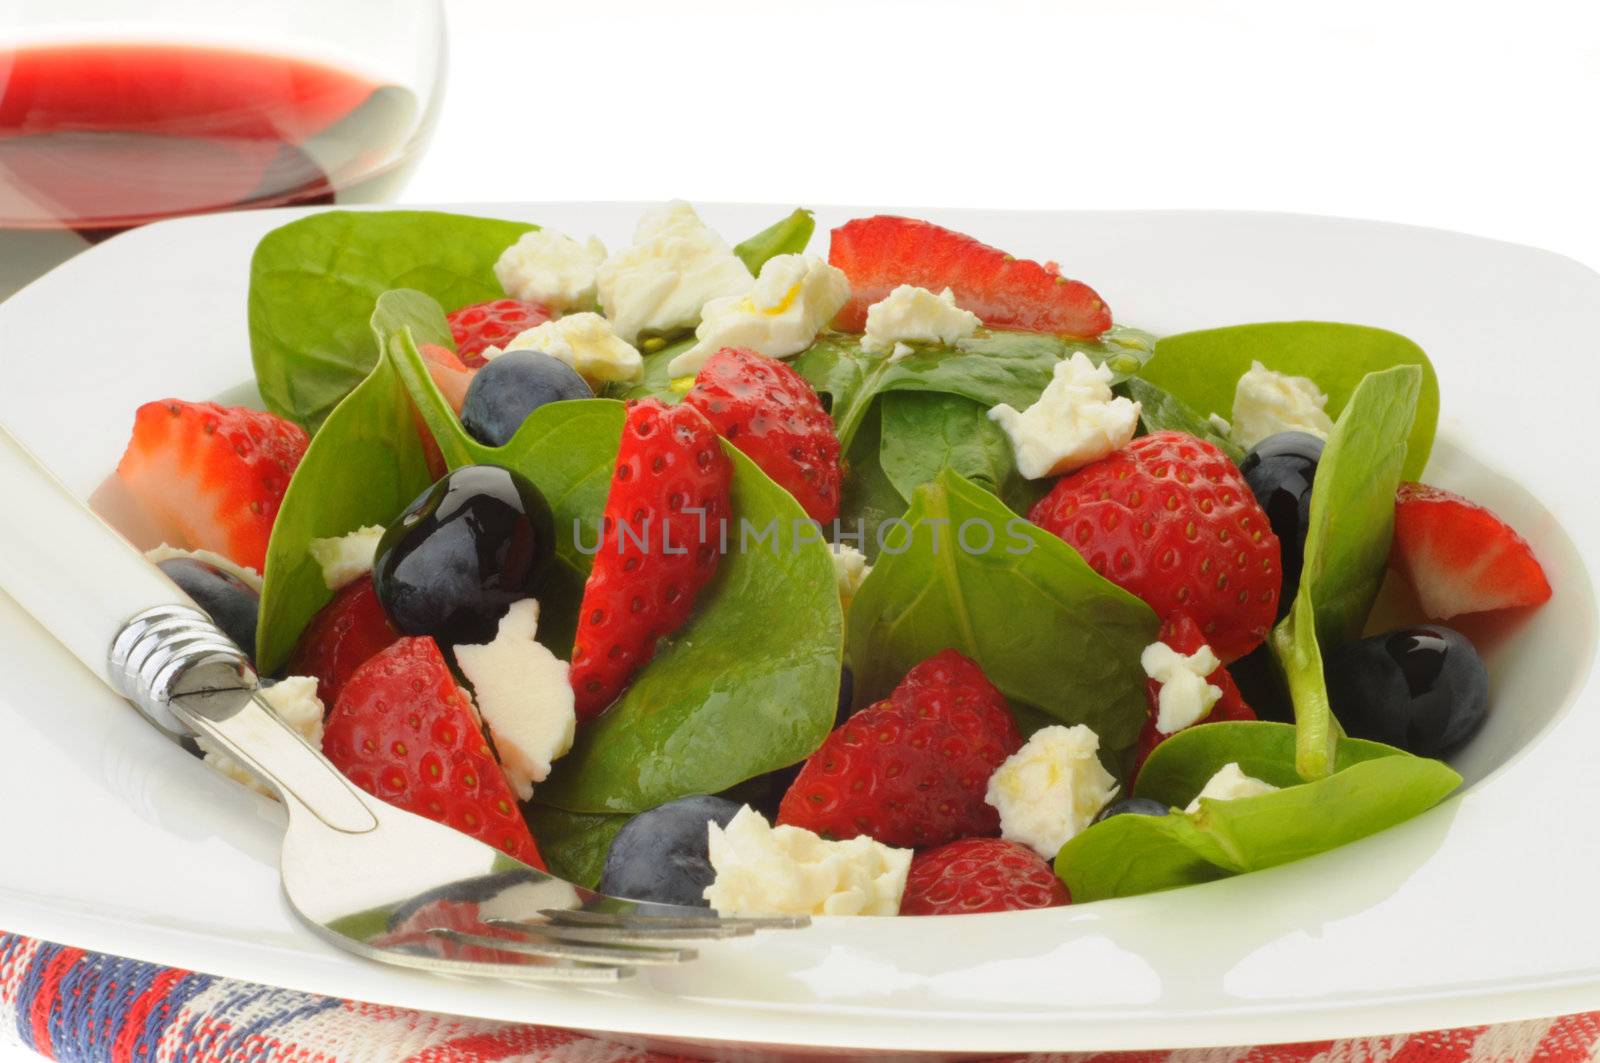 Colorful summer salad of greens, fruit and feta cheese.